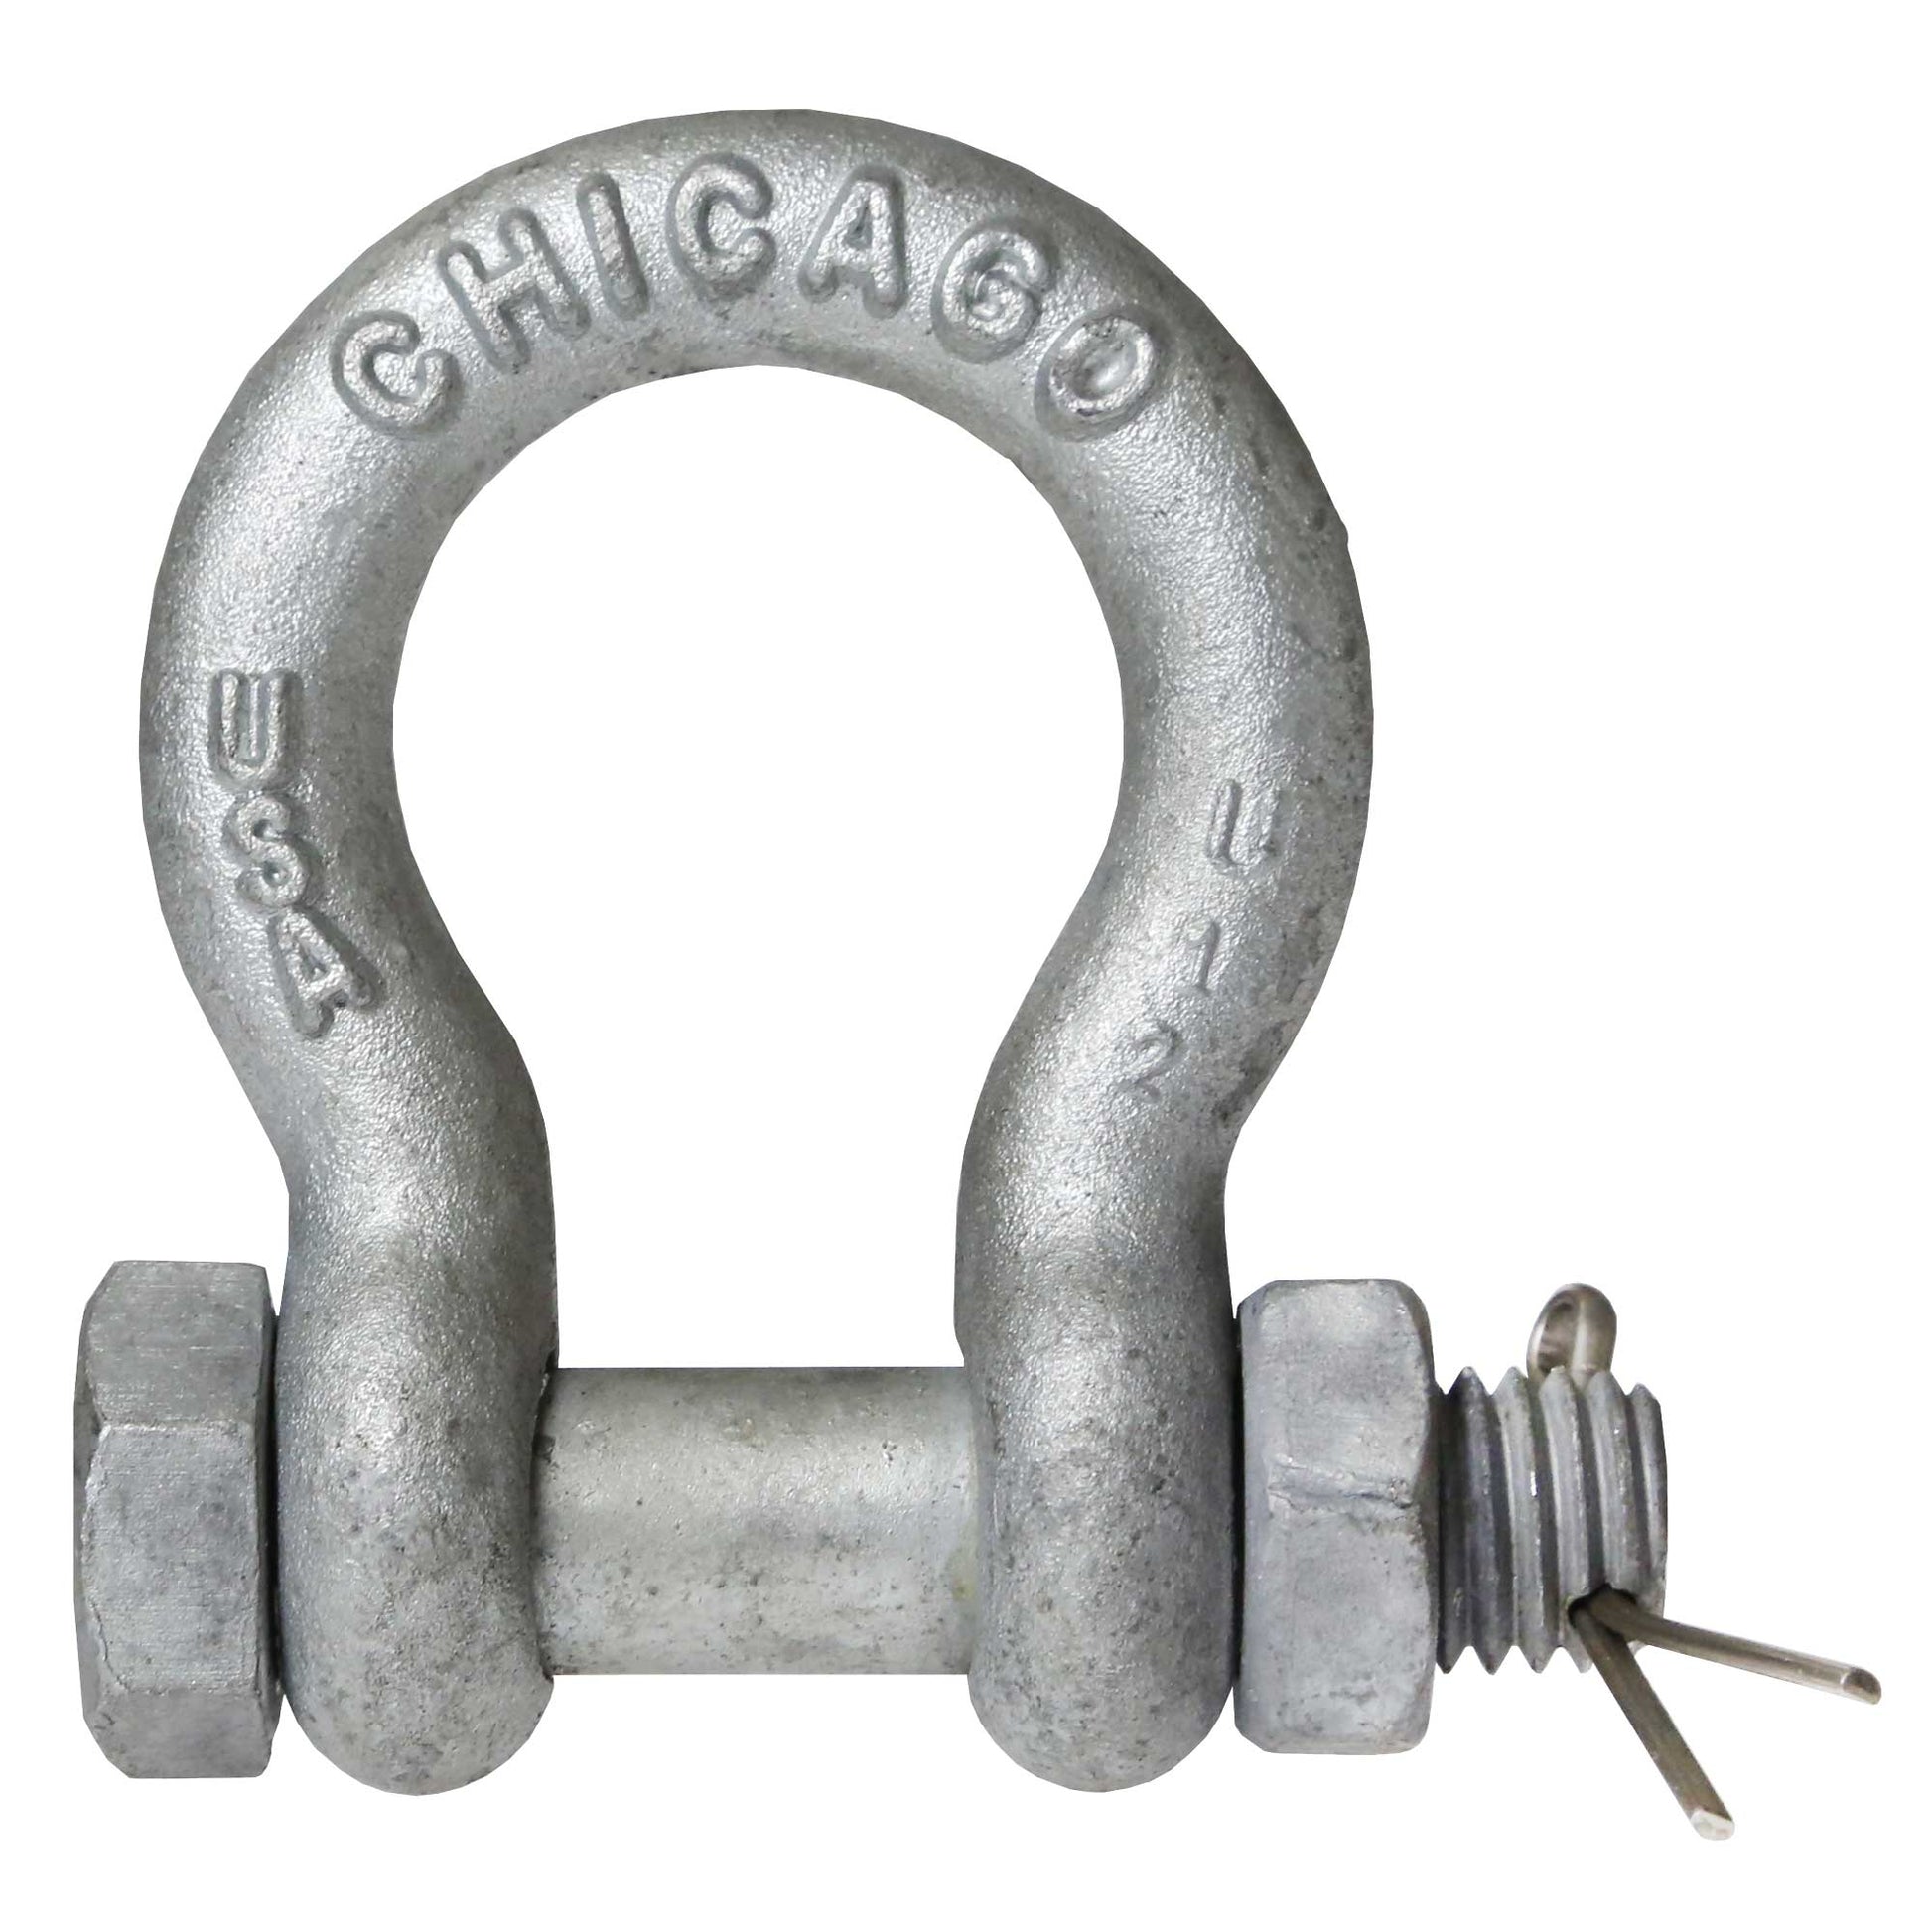 Bolt Type Anchor Shackle - Chicago Hardware - 3/8" Galvanized Steel - 1 Ton primary image